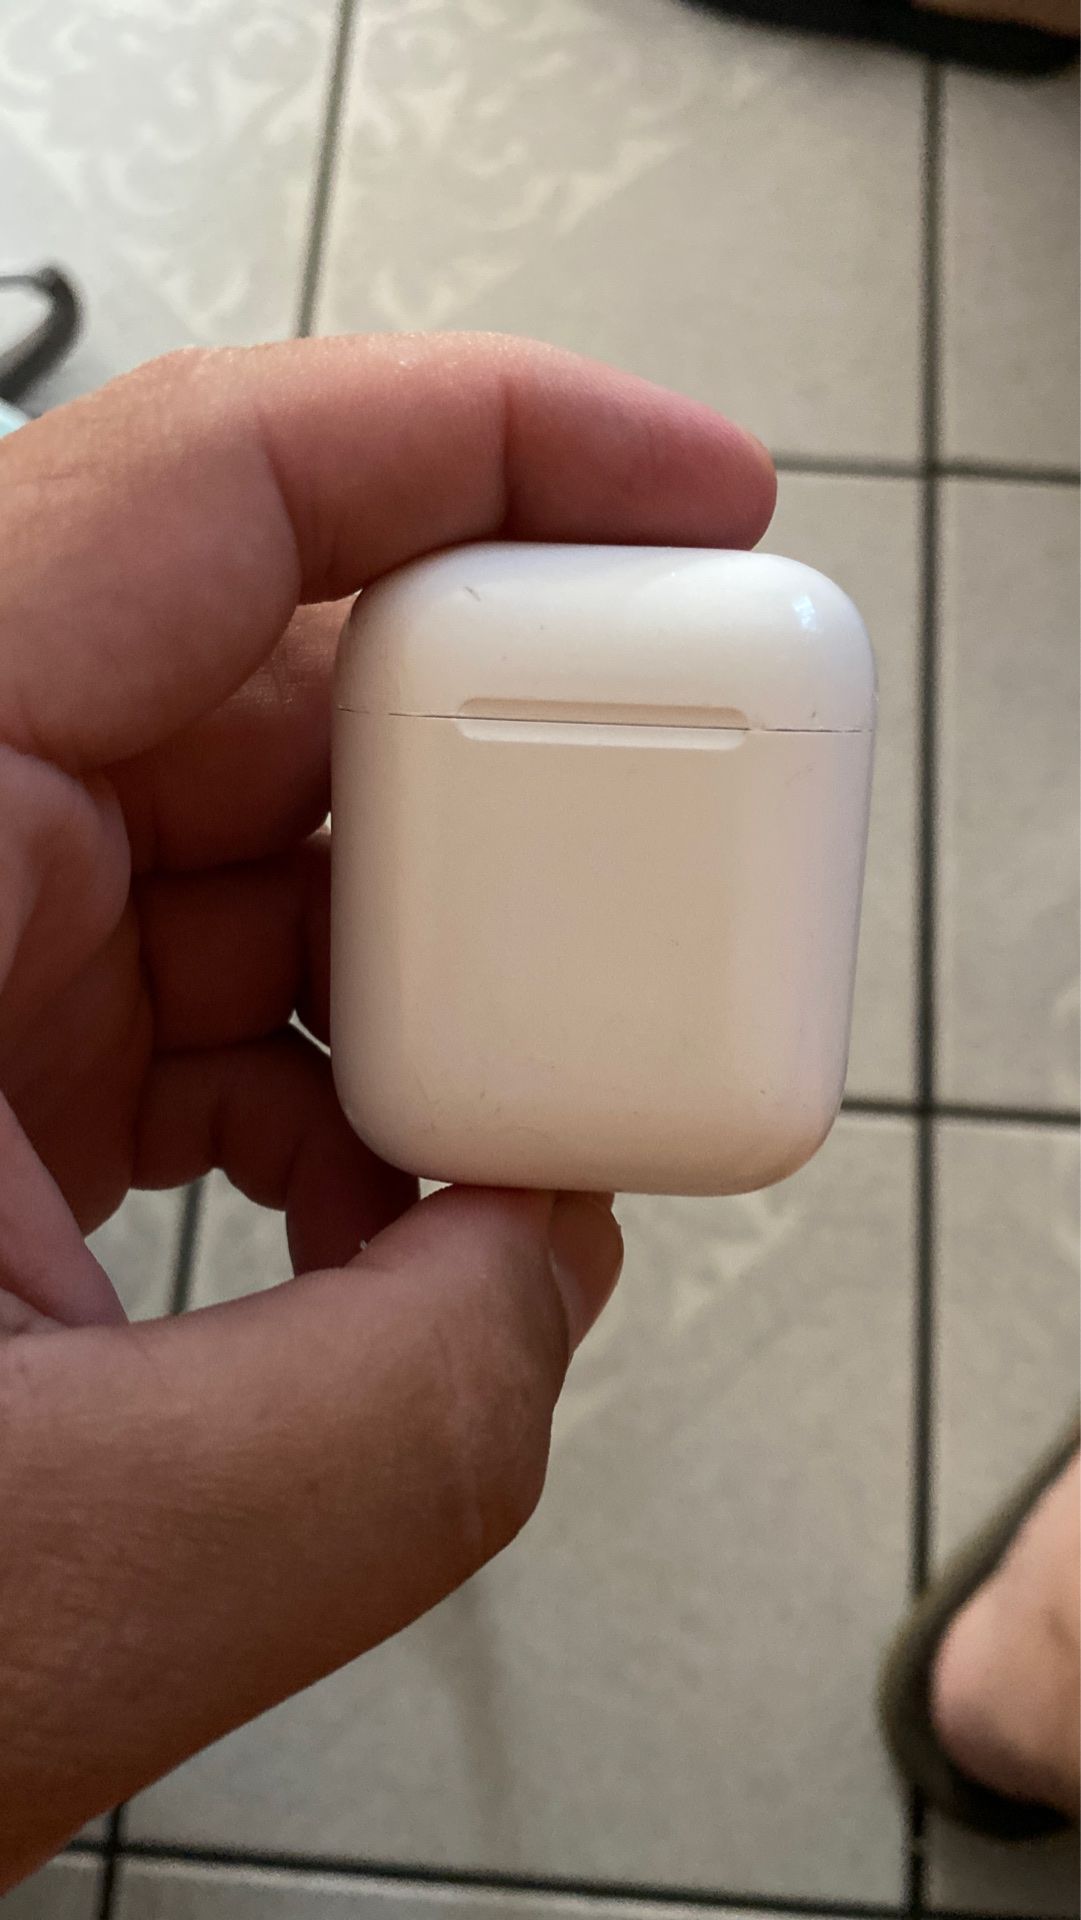 Selling AirPods but only has 1 AirPod